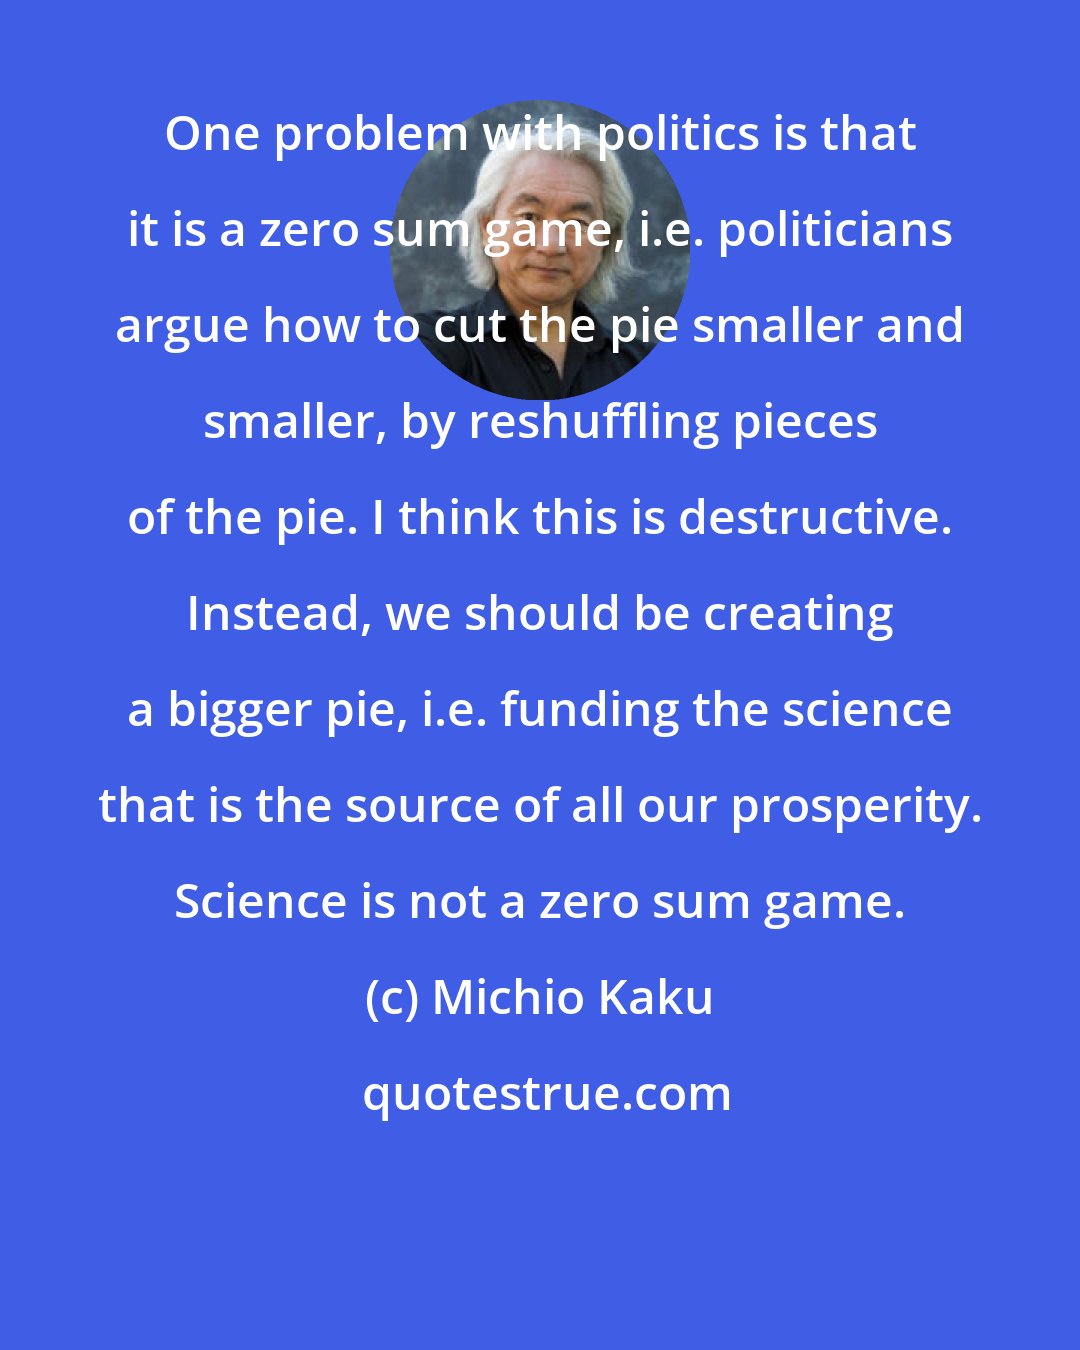 Michio Kaku: One problem with politics is that it is a zero sum game, i.e. politicians argue how to cut the pie smaller and smaller, by reshuffling pieces of the pie. I think this is destructive. Instead, we should be creating a bigger pie, i.e. funding the science that is the source of all our prosperity. Science is not a zero sum game.